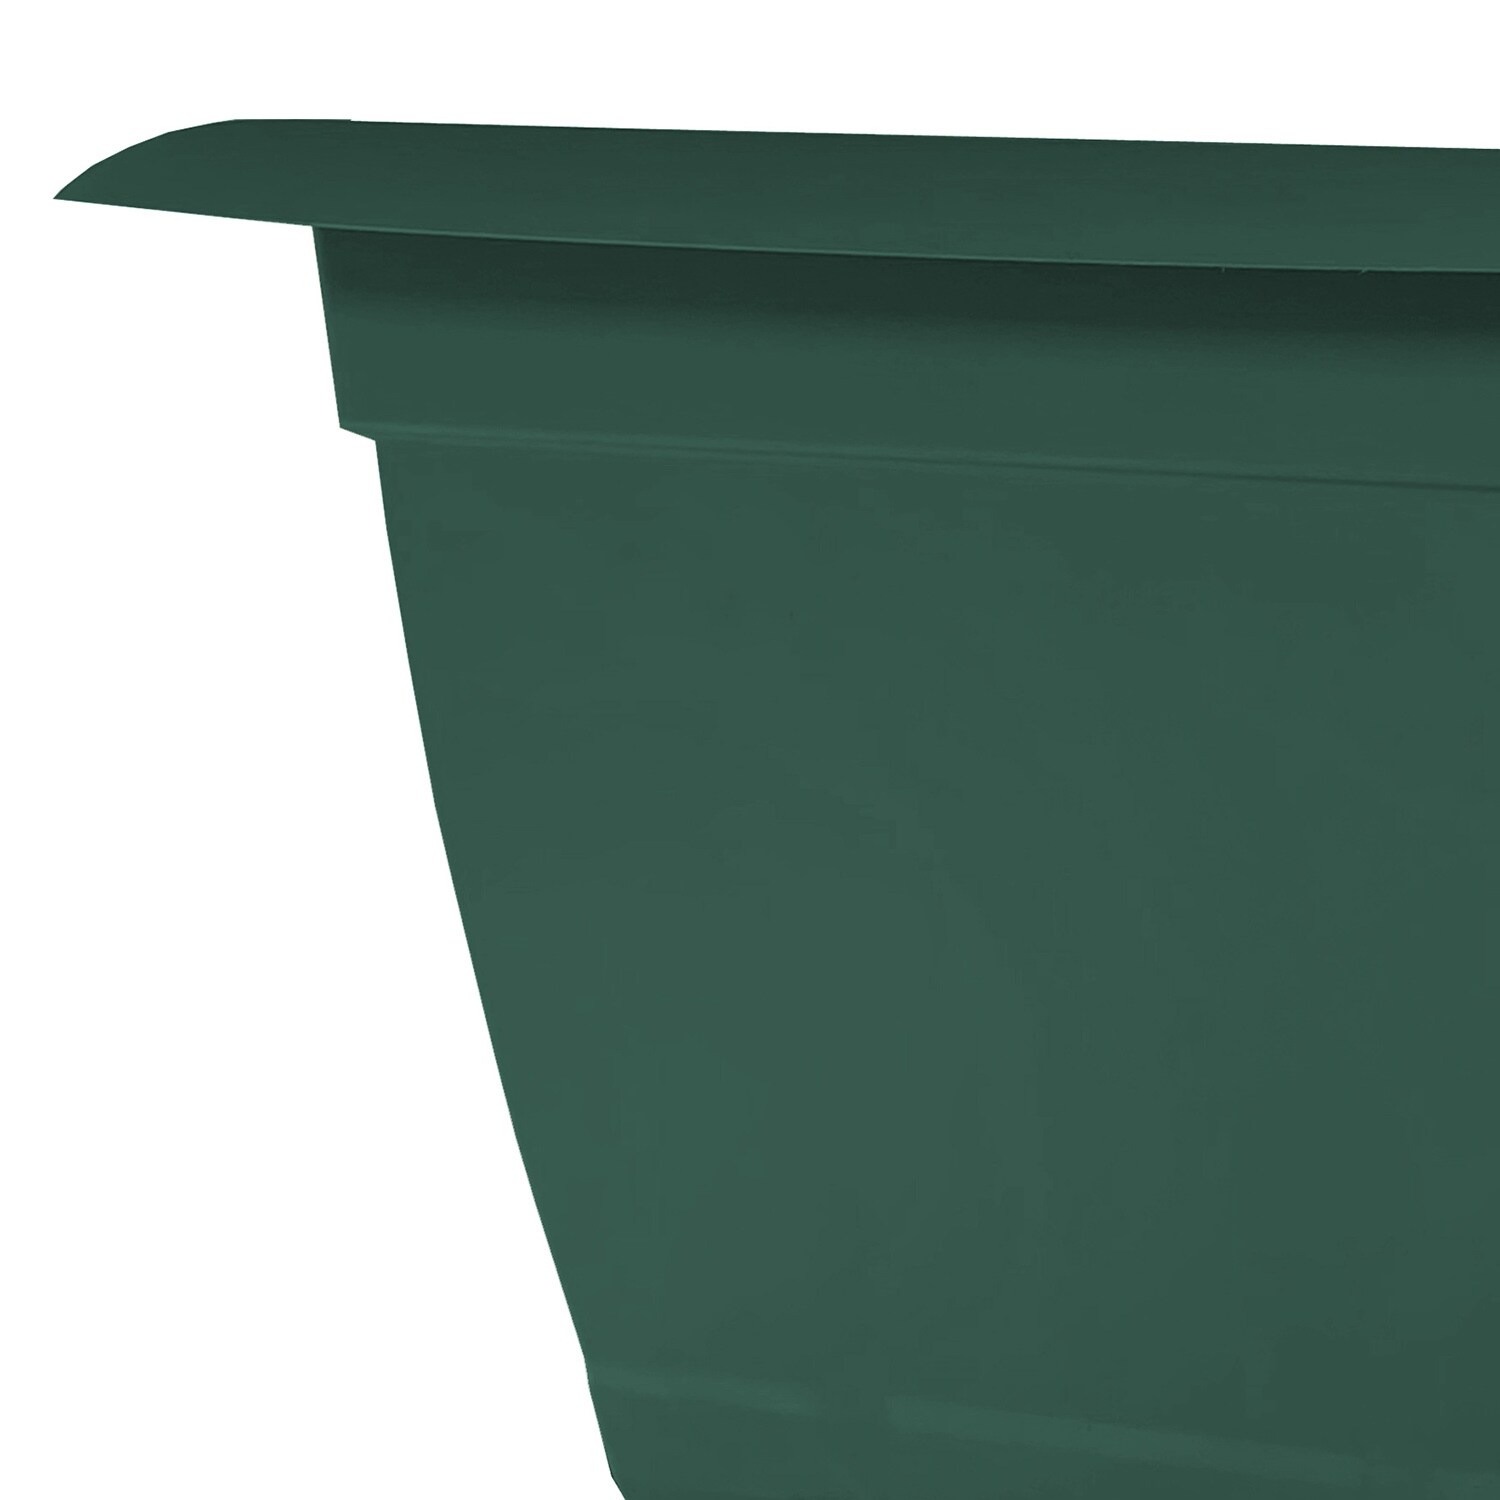 Bloem Dayton Square Deck Planter: 15" - Turtle Green - 100% Recycled Durable Plastic, Elevated Feet